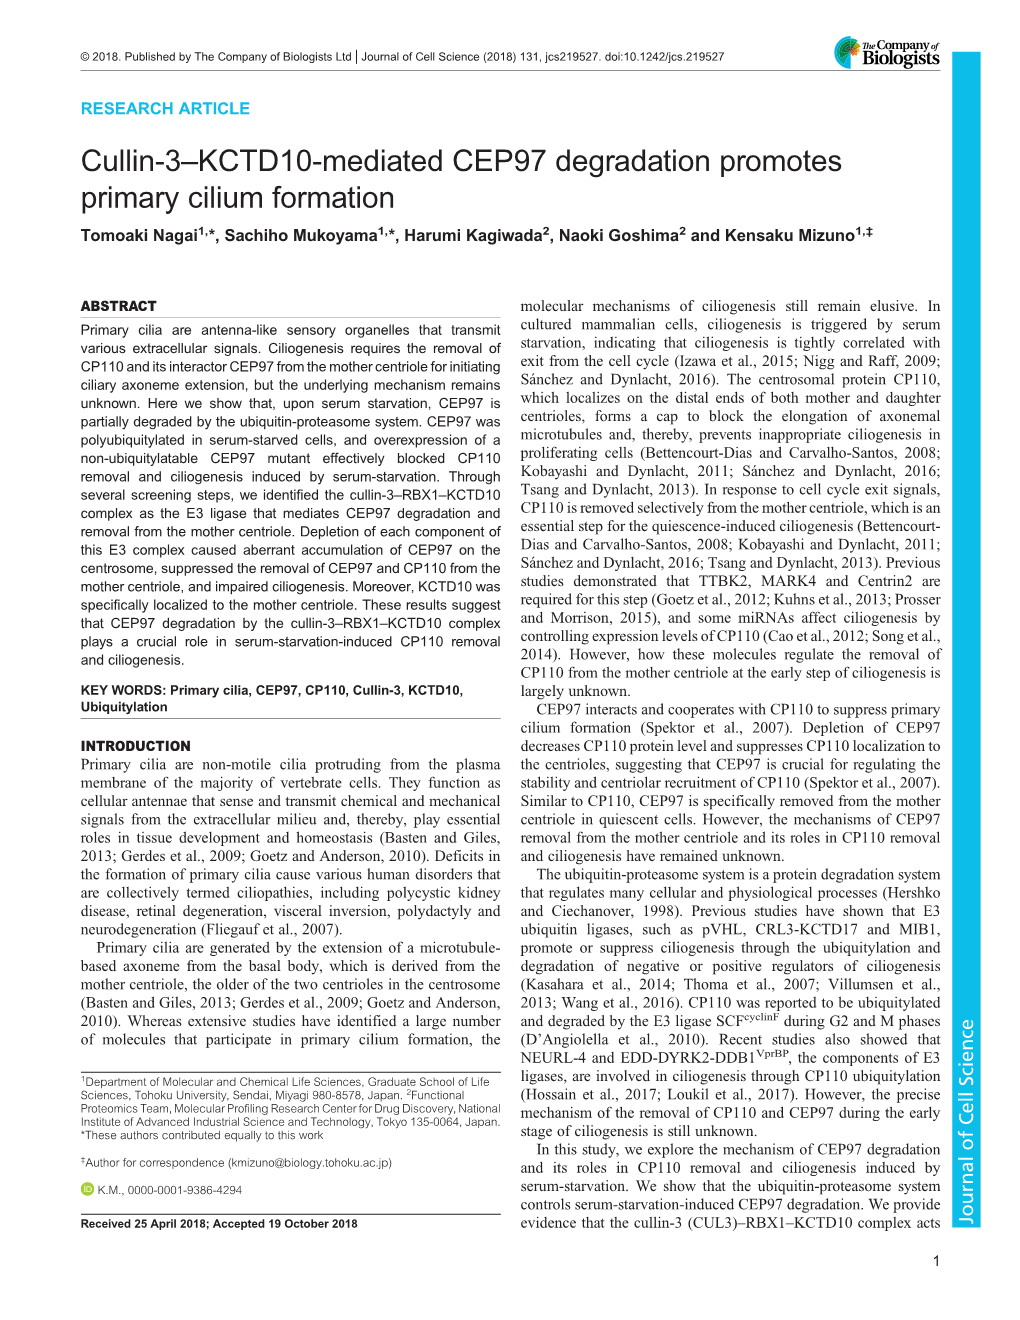 Cullin-3–KCTD10-Mediated CEP97 Degradation Promotes Primary Cilium Formation